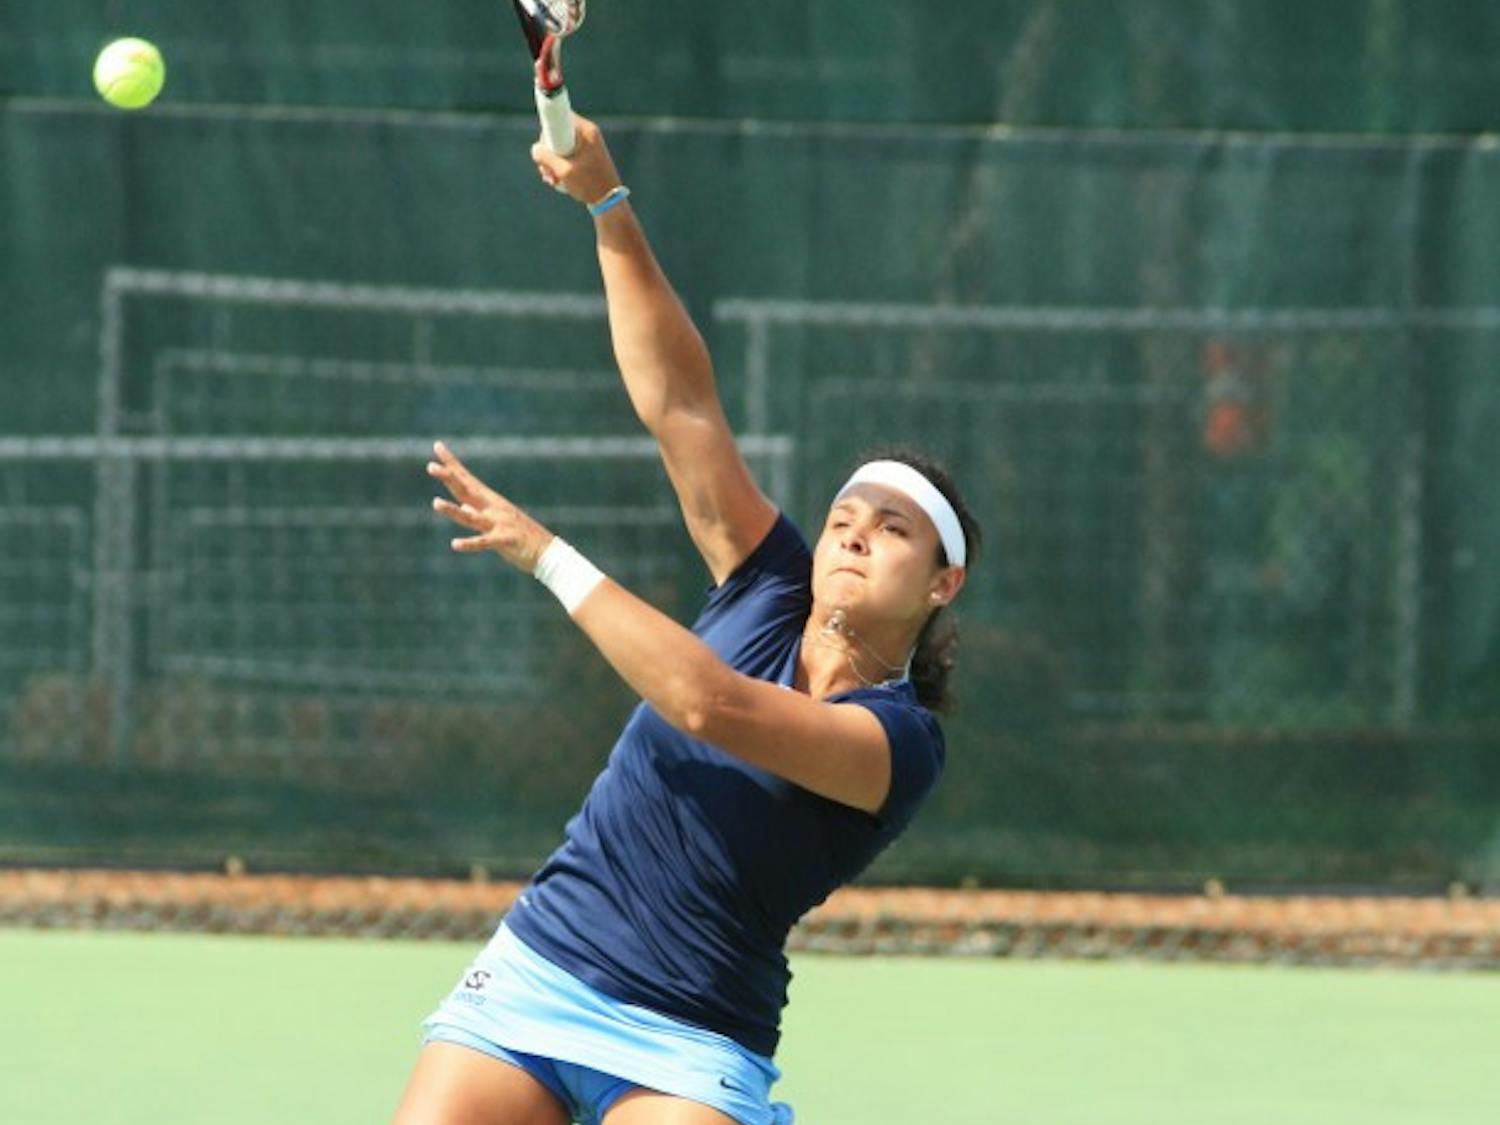 Wednesday's match between UNC Women's Tennis against N.C. State Wolfpack